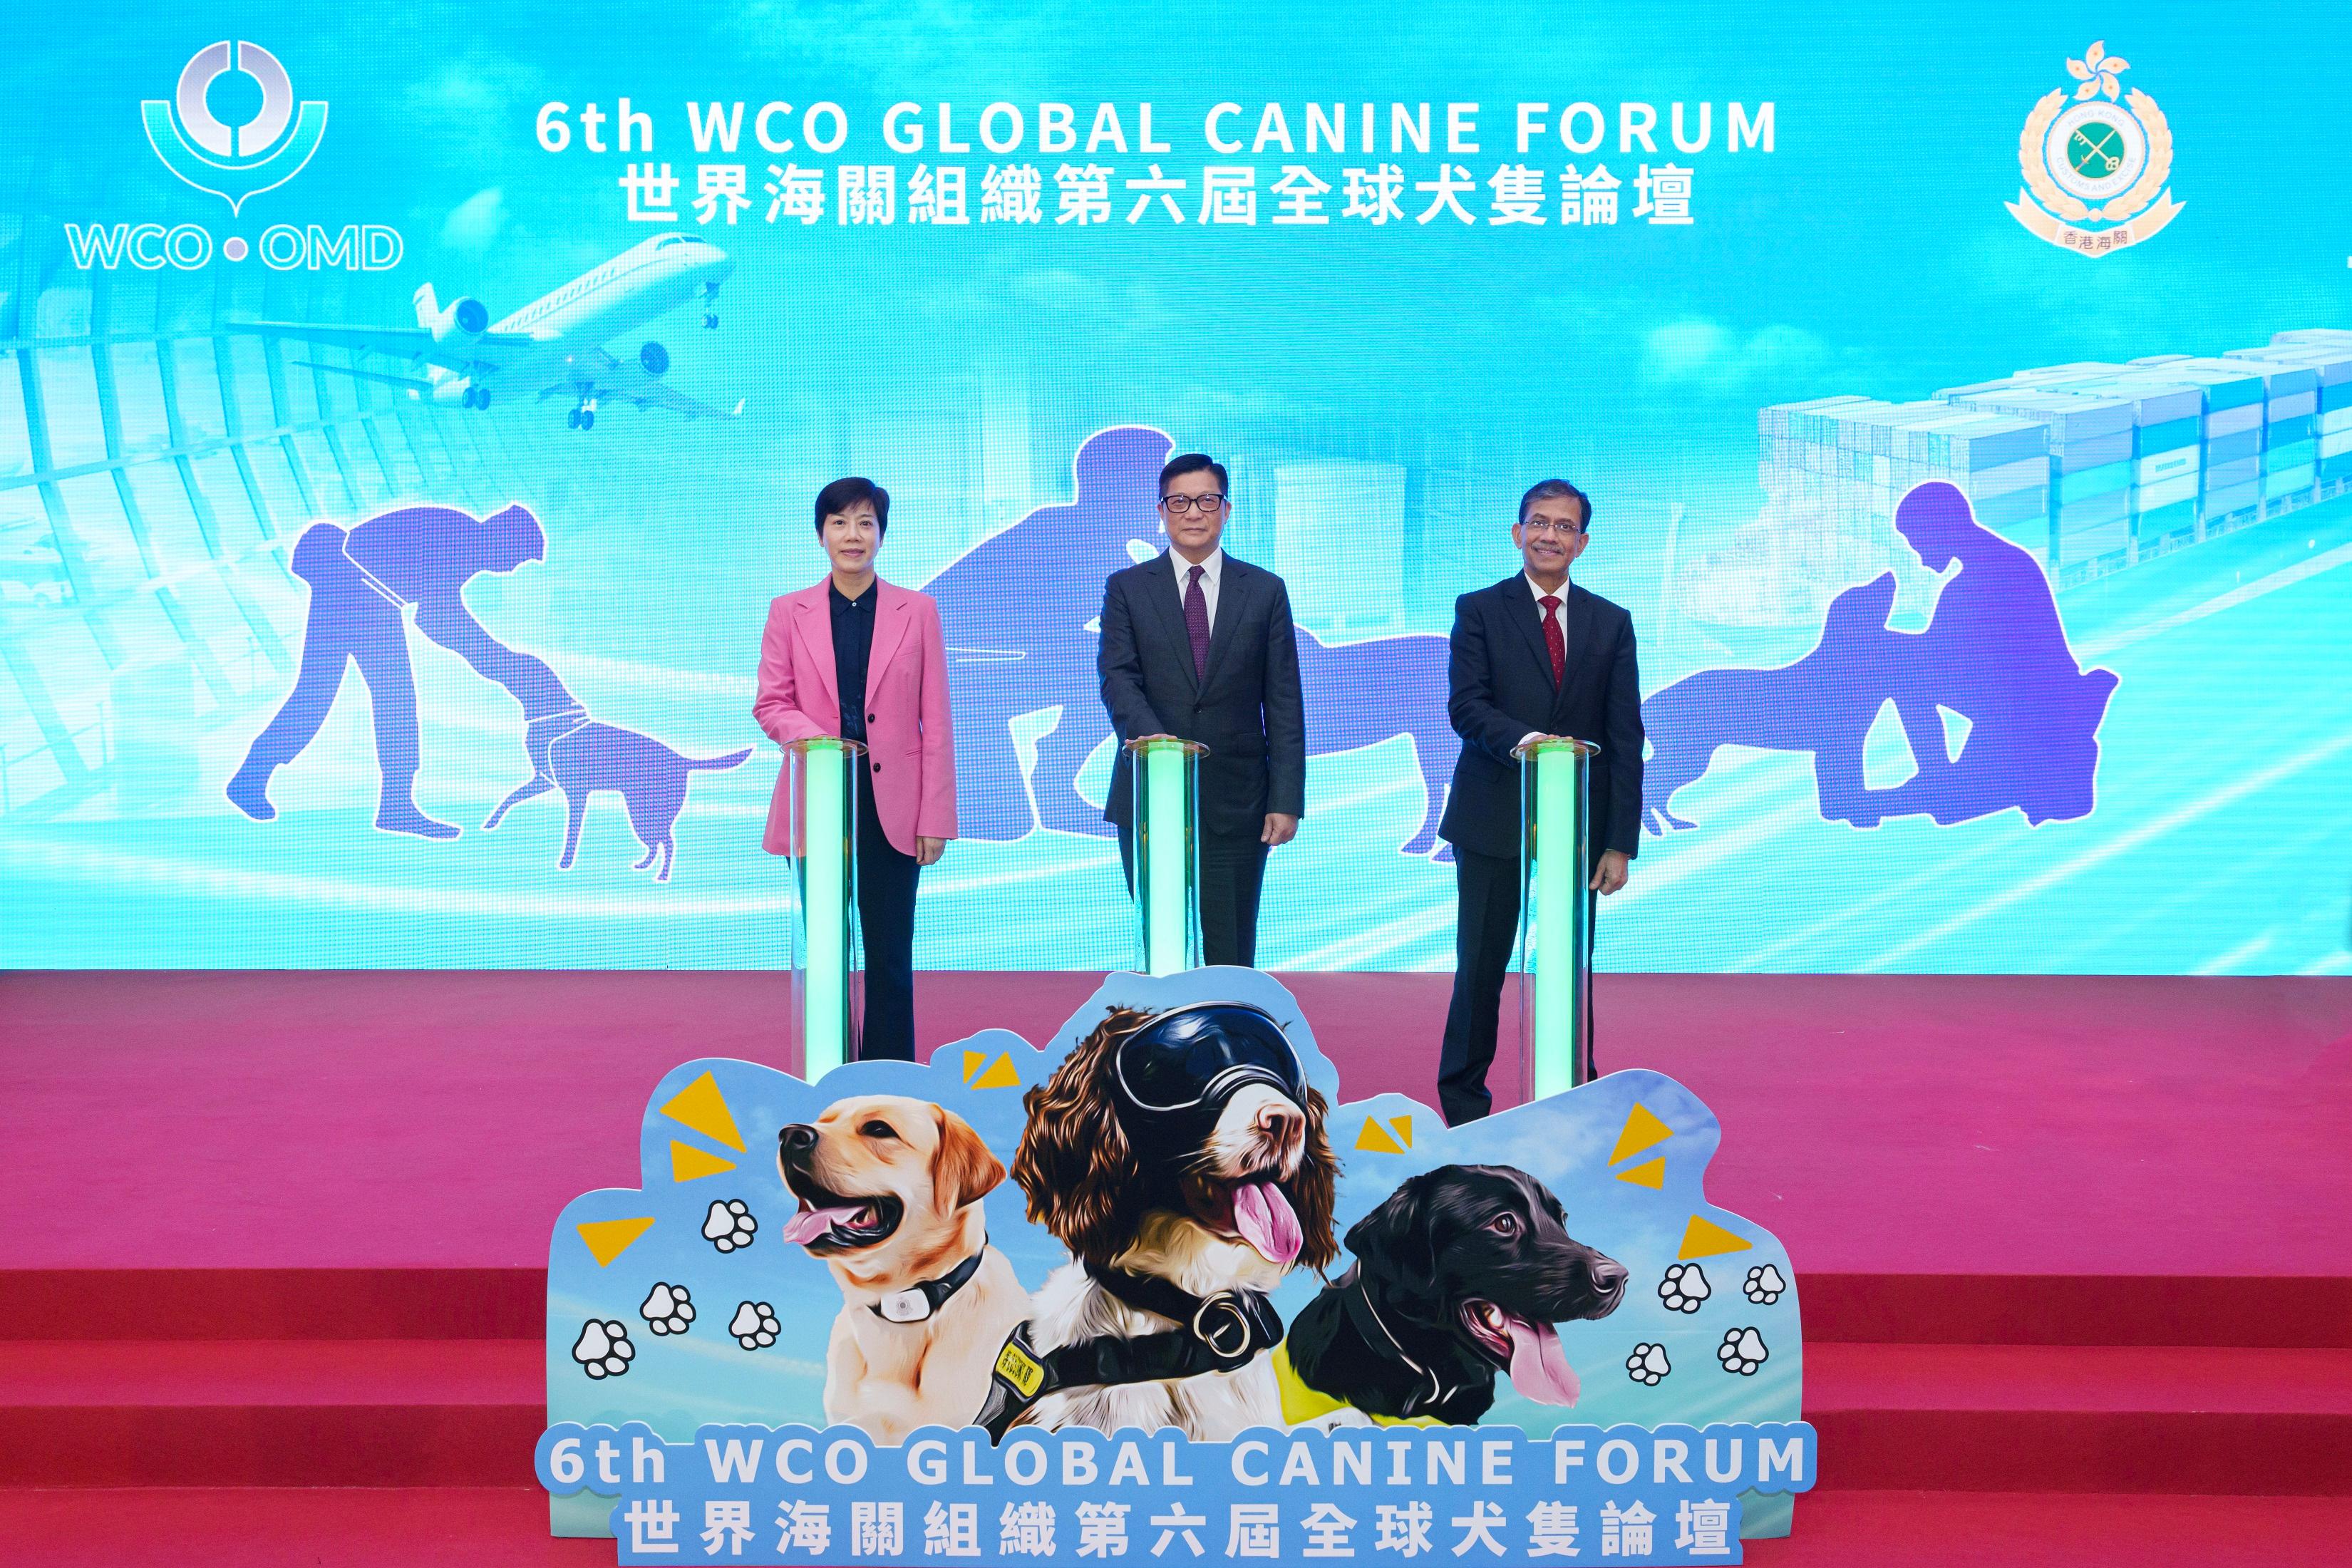 The three-day 6th World Customs Organization (WCO) Global Canine Forum hosted by Hong Kong Customs opened today (March 5). Photo shows the Secretary for Security, Mr Tang Ping-keung (centre); the Commissioner of Customs and Excise, Ms Louise Ho (left); and the WCO Director for Compliance and Facilitation, Mr Pranab Kumar Das (right), officiating at the opening ceremony for the Forum.

